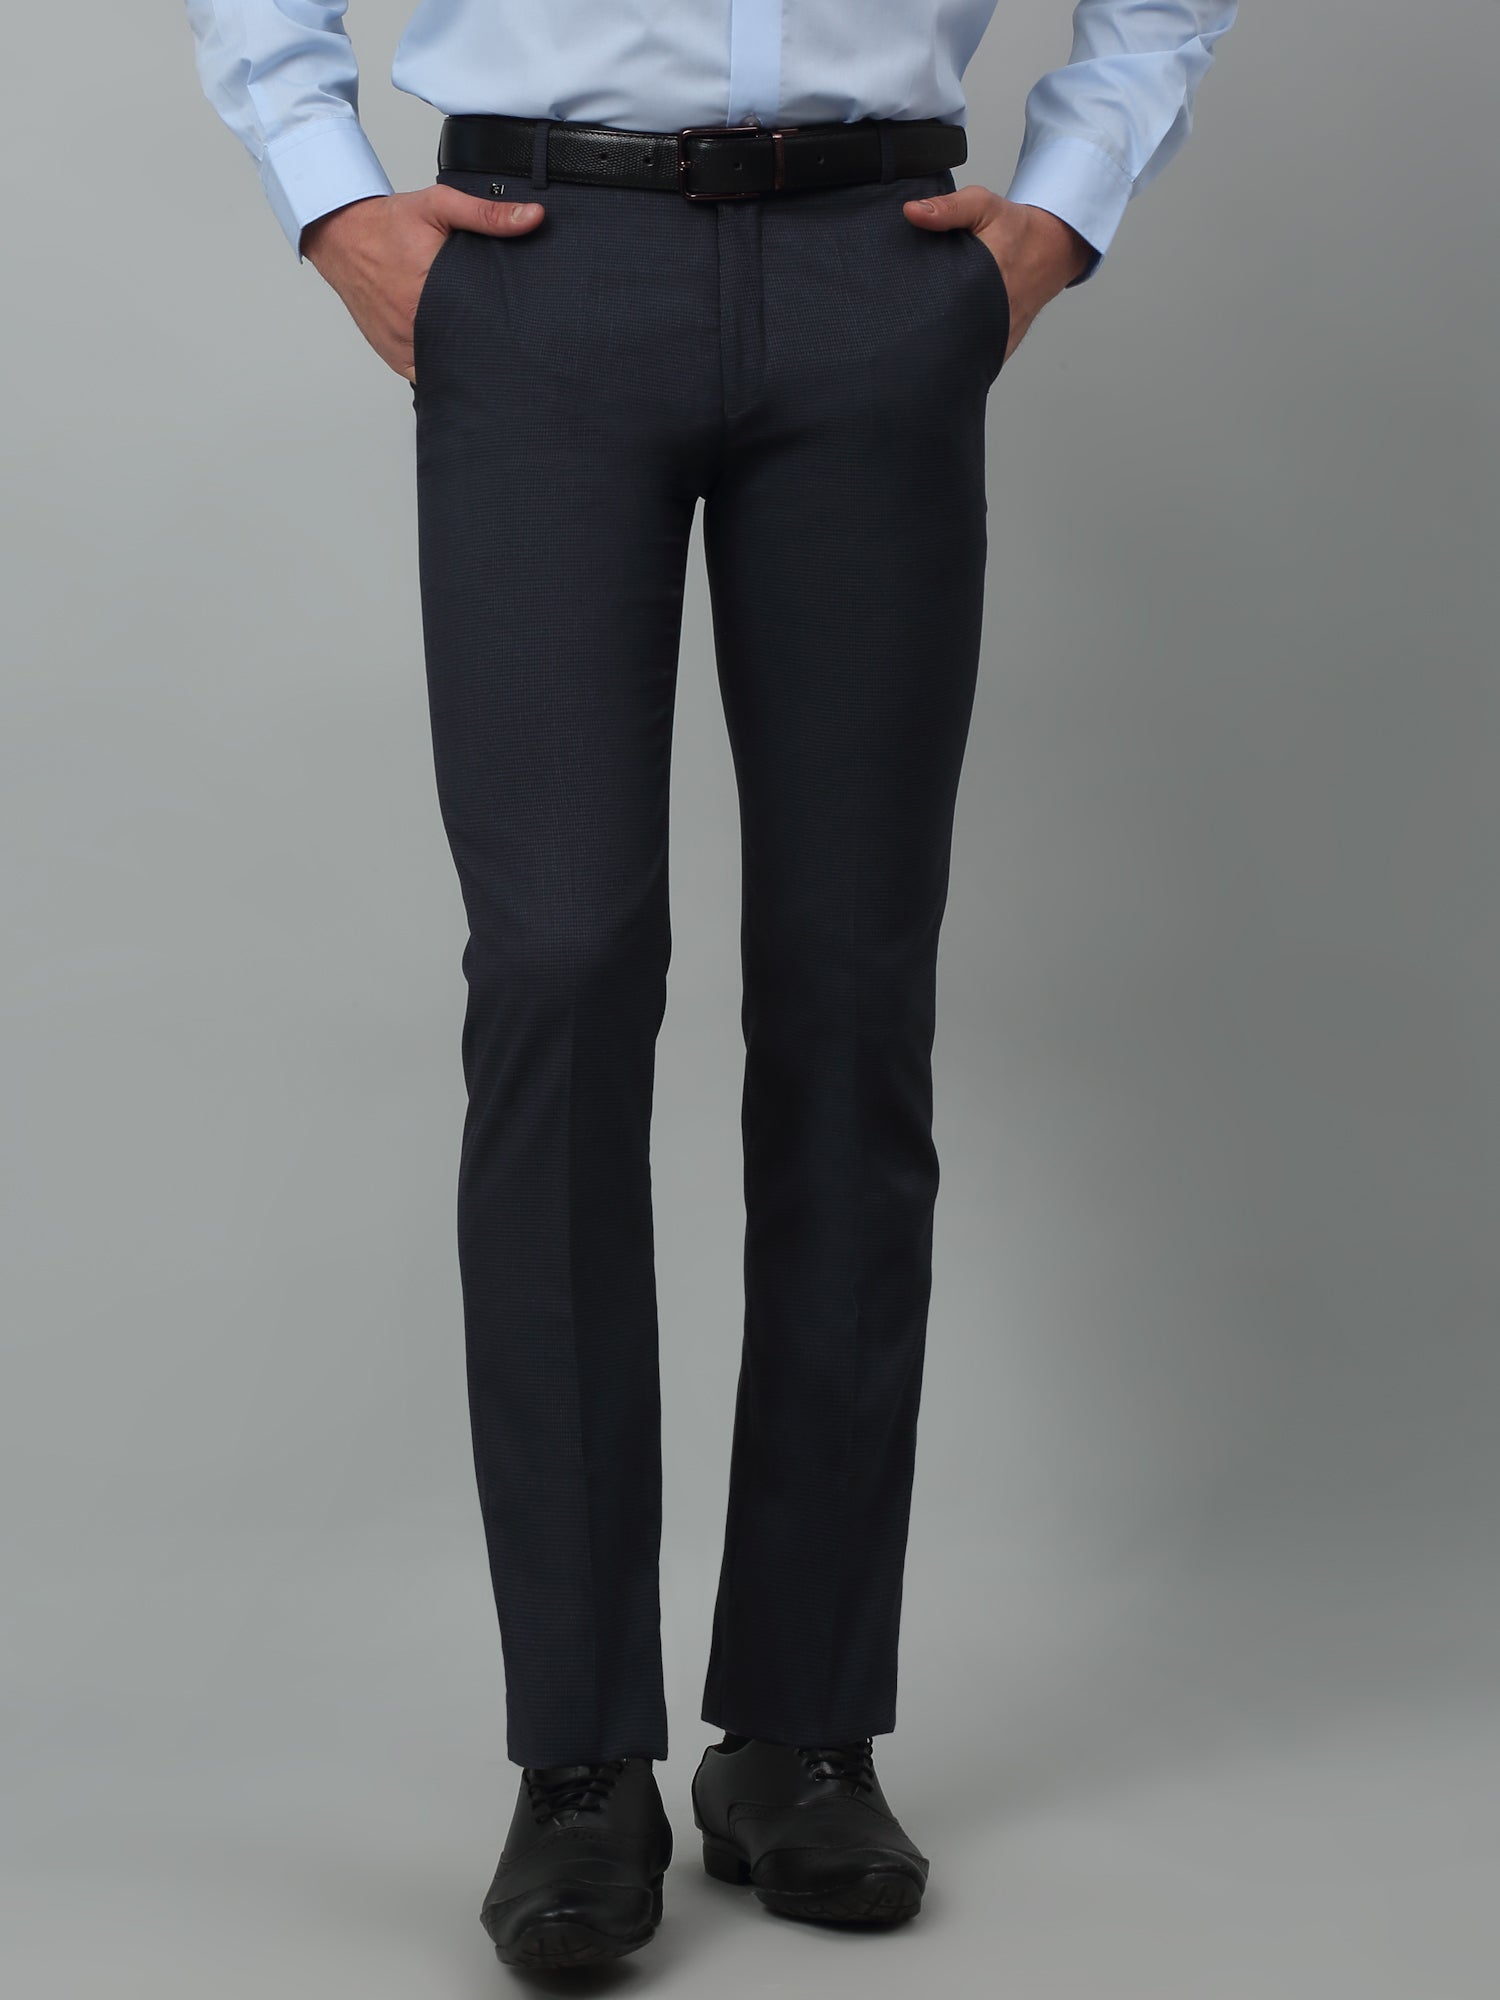 Top Cantabil Trouser Retailers in Anand - Best Cantabil Trouser Retailers -  Justdial